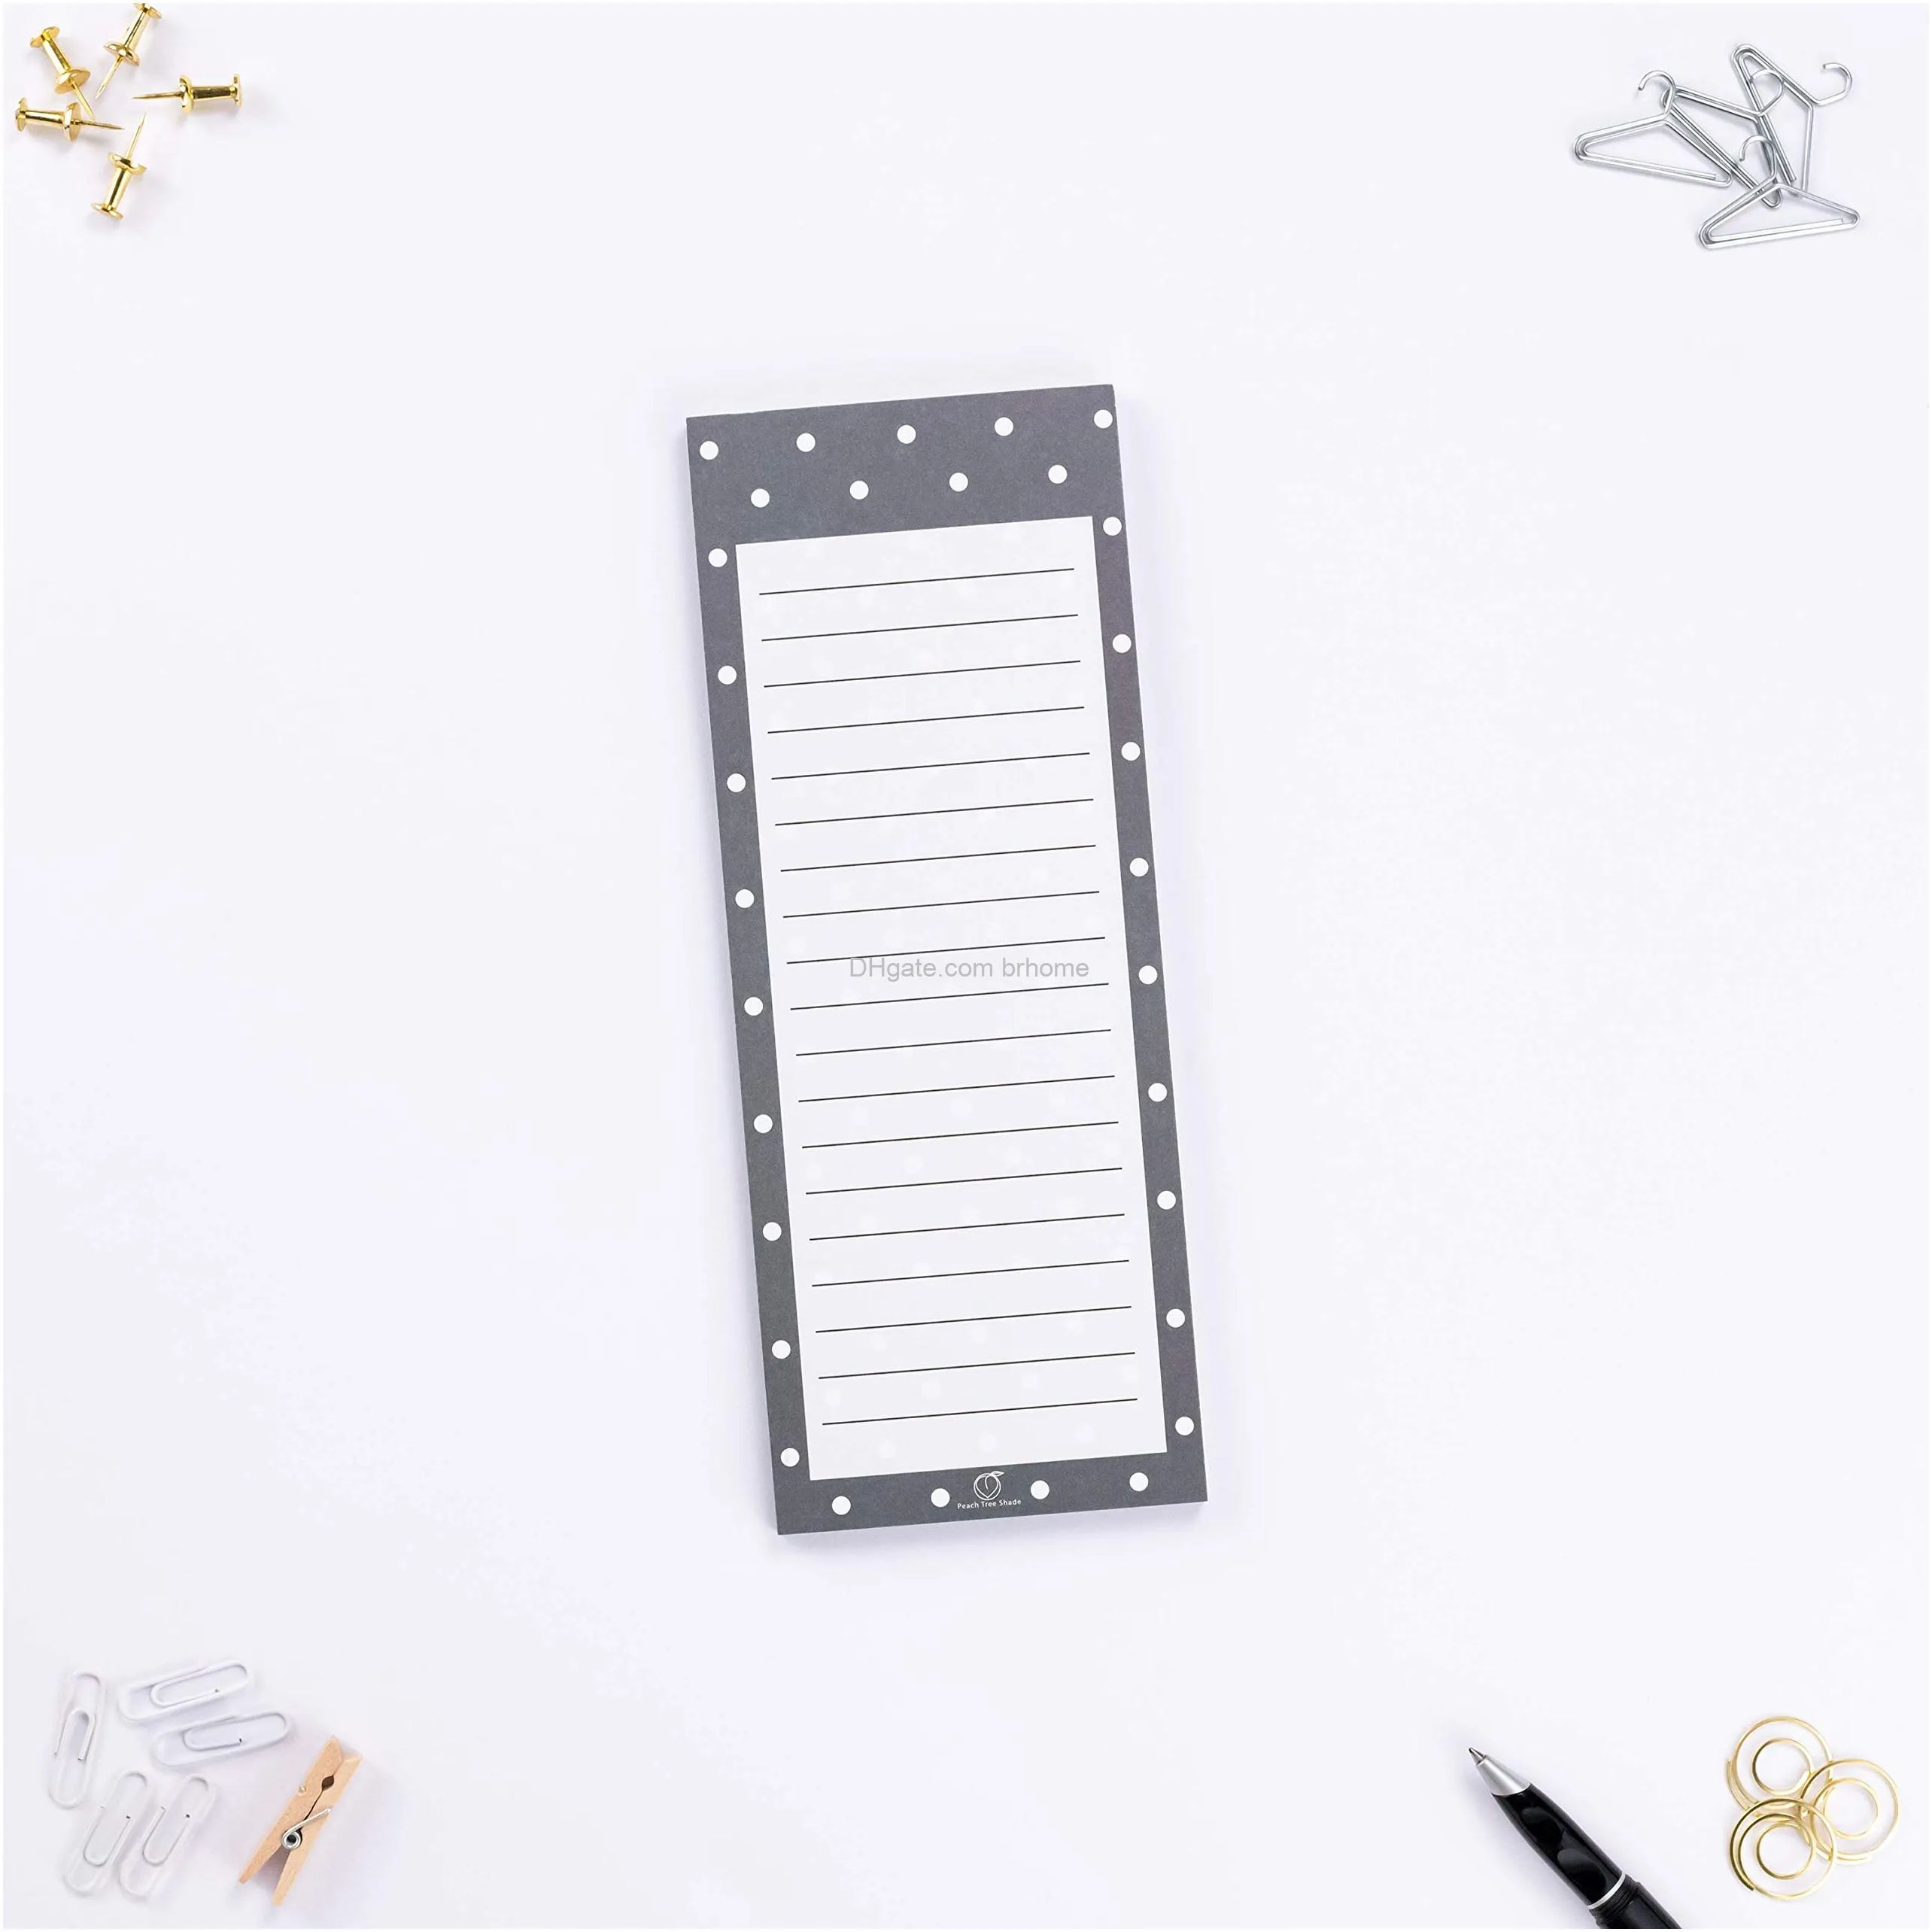 magnetic notepads 60 sheets per pad 3.5 x 9 inches for fridge kitchen shopping grocery todo list memo reminder note book stationery inknotes